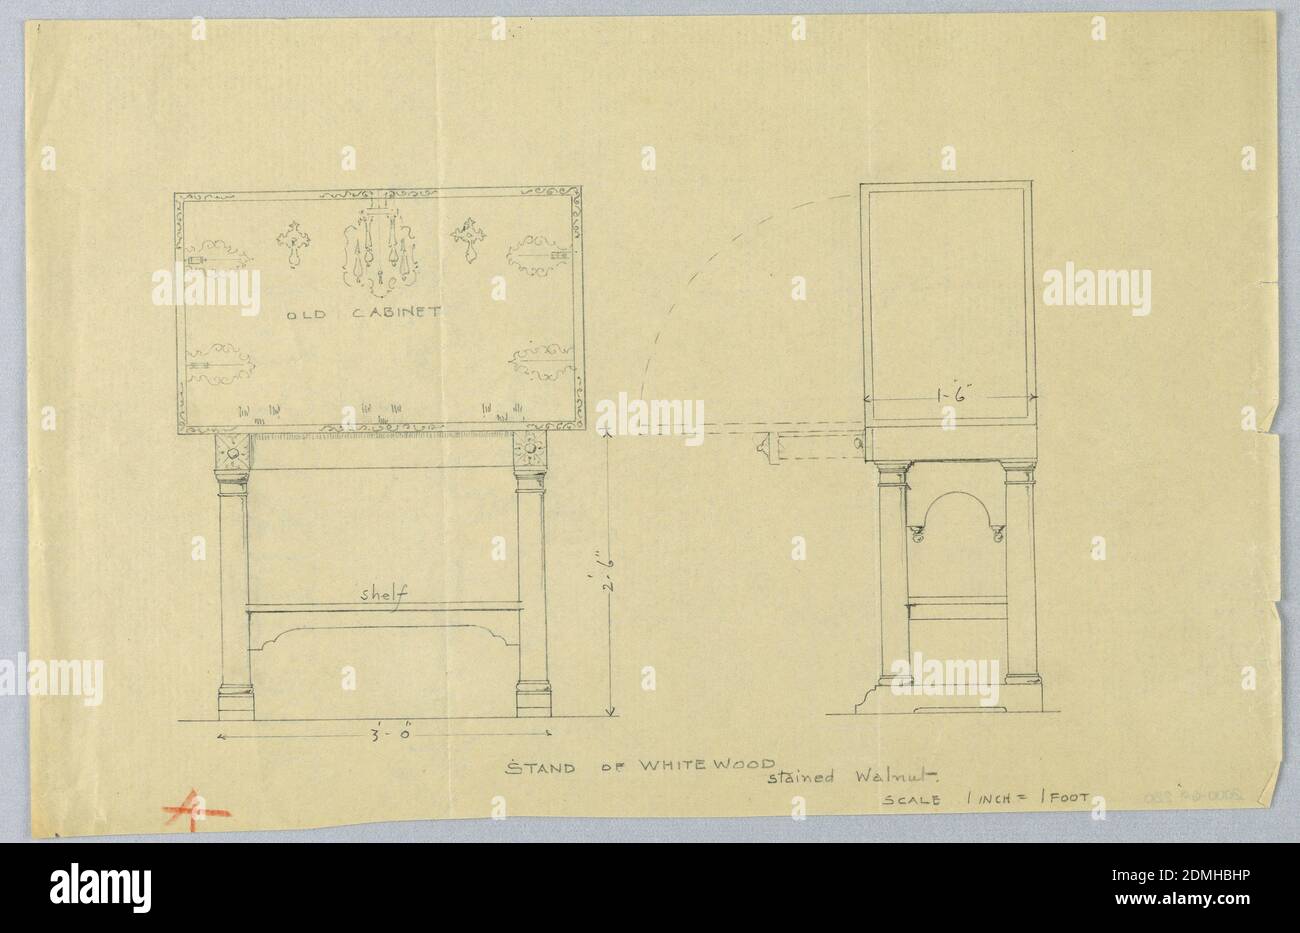 Design 'A' for Stand of Whitewood and Stained Walnut, A.N. Davenport Co., Graphite, red color pencil on thin cream paper, Elevation left and side view right; rectangular cabinet with elaborate stylized metalwork on front panel; pair of hinged plates surround keyhole escutcheon center; raised on columnar, slightly flaring supports joined below by shelf-like stretcher; side view shows cabinet standing on 2 bracket-shaped platforms joined above by molded panel with arch-like cut-out center., 1900–05, furniture, Drawing Stock Photo